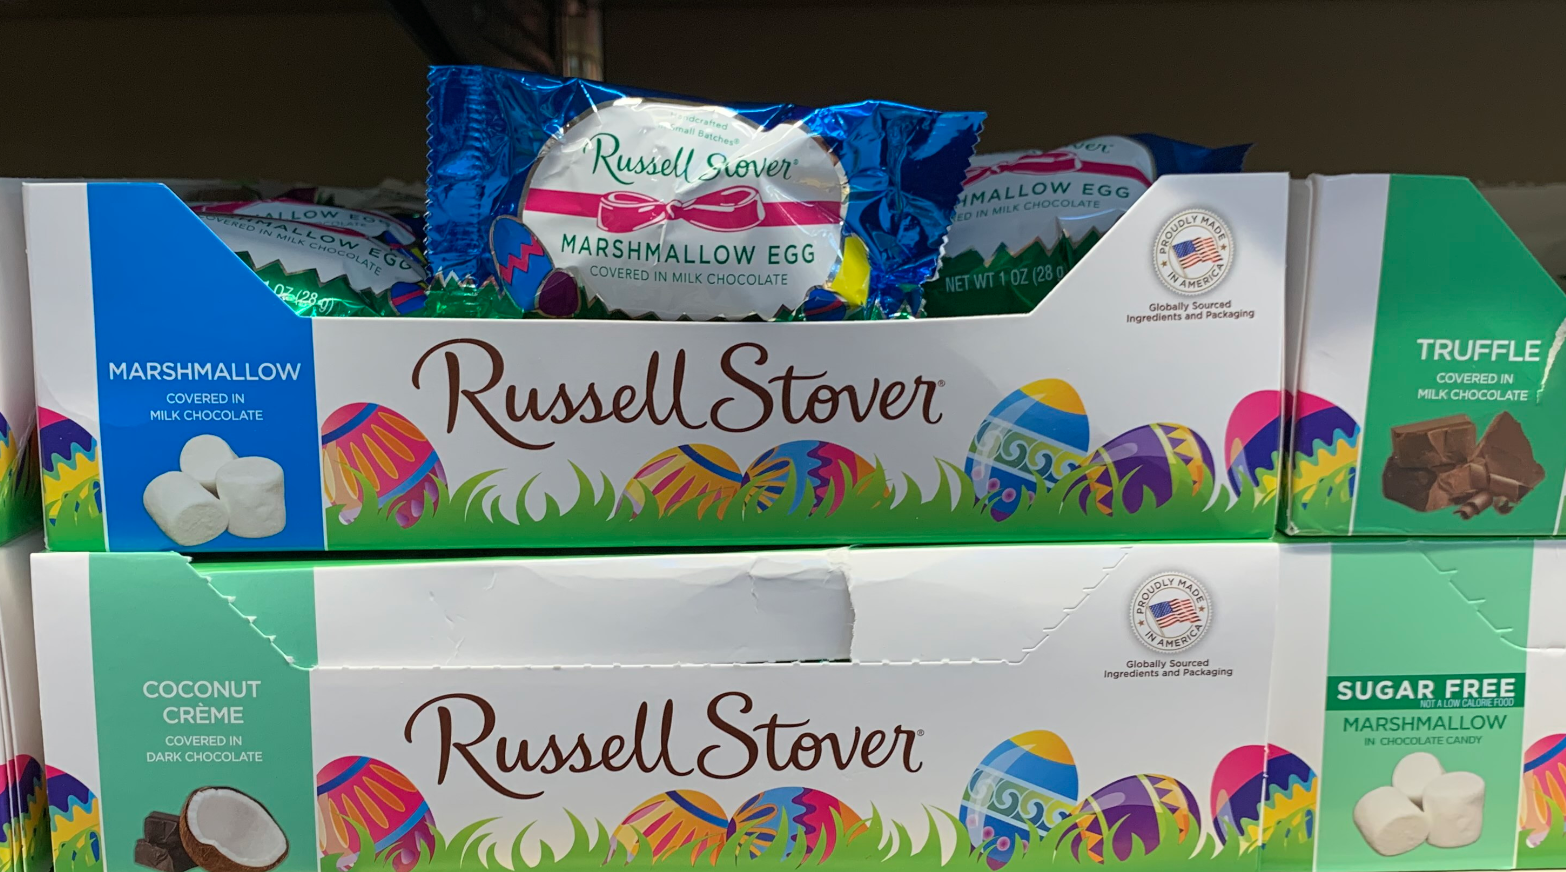 Russell Stover Easter Eggs Singles Just 0.40 at ShopRite! Living